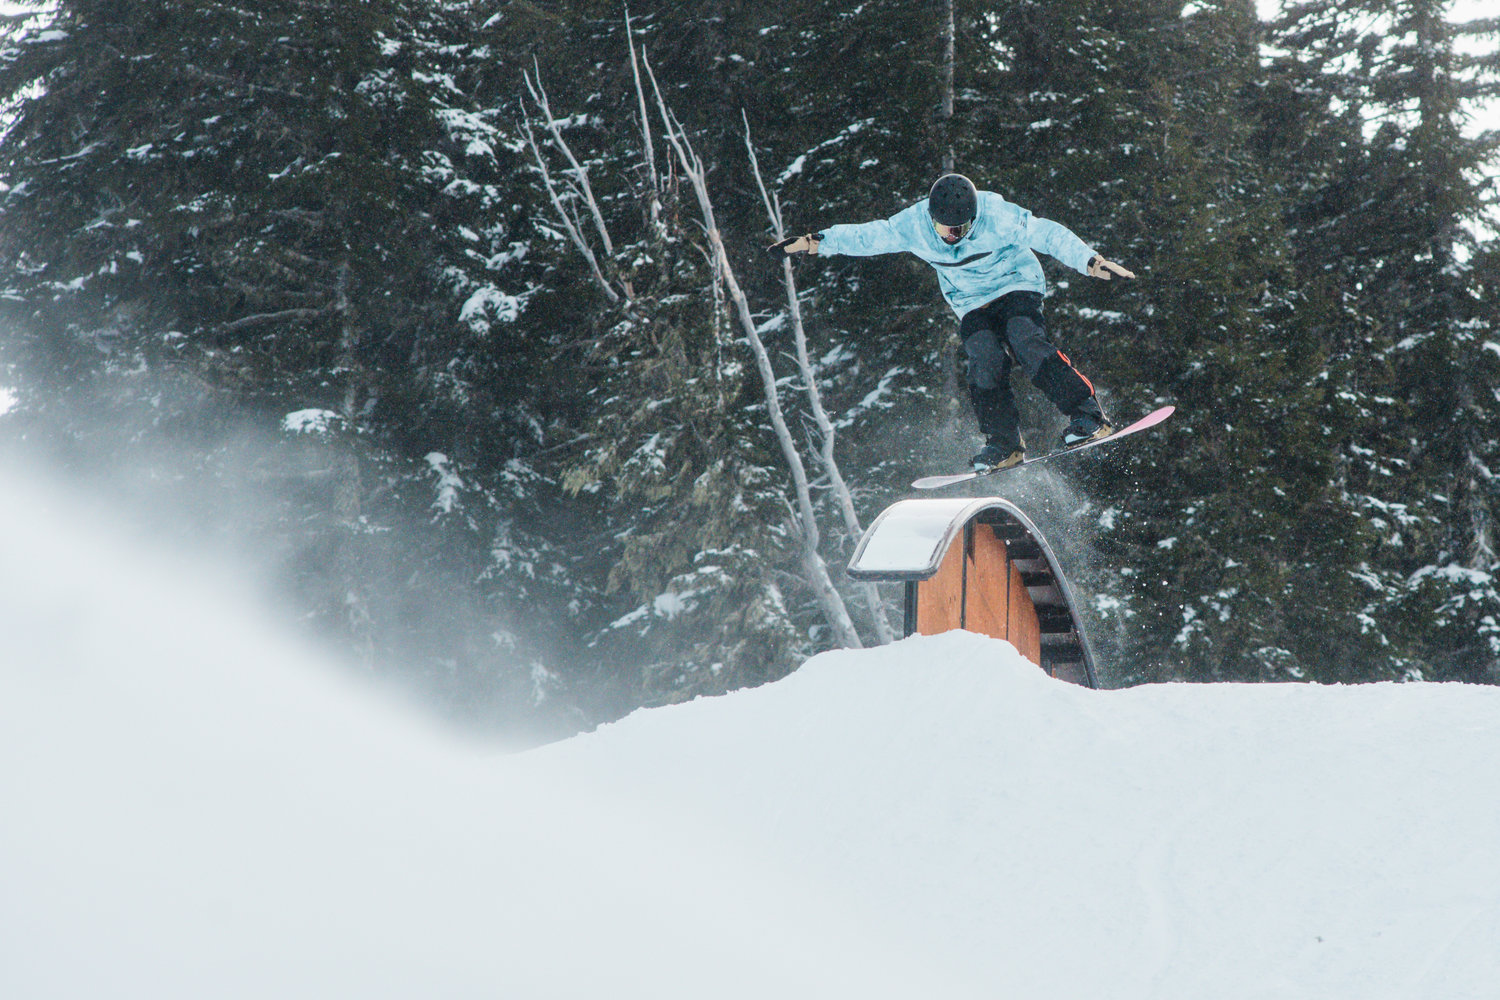 A snowboarder sticks the landing at the Ribeye jump park inside the White Pass Ski Area on Sunday.